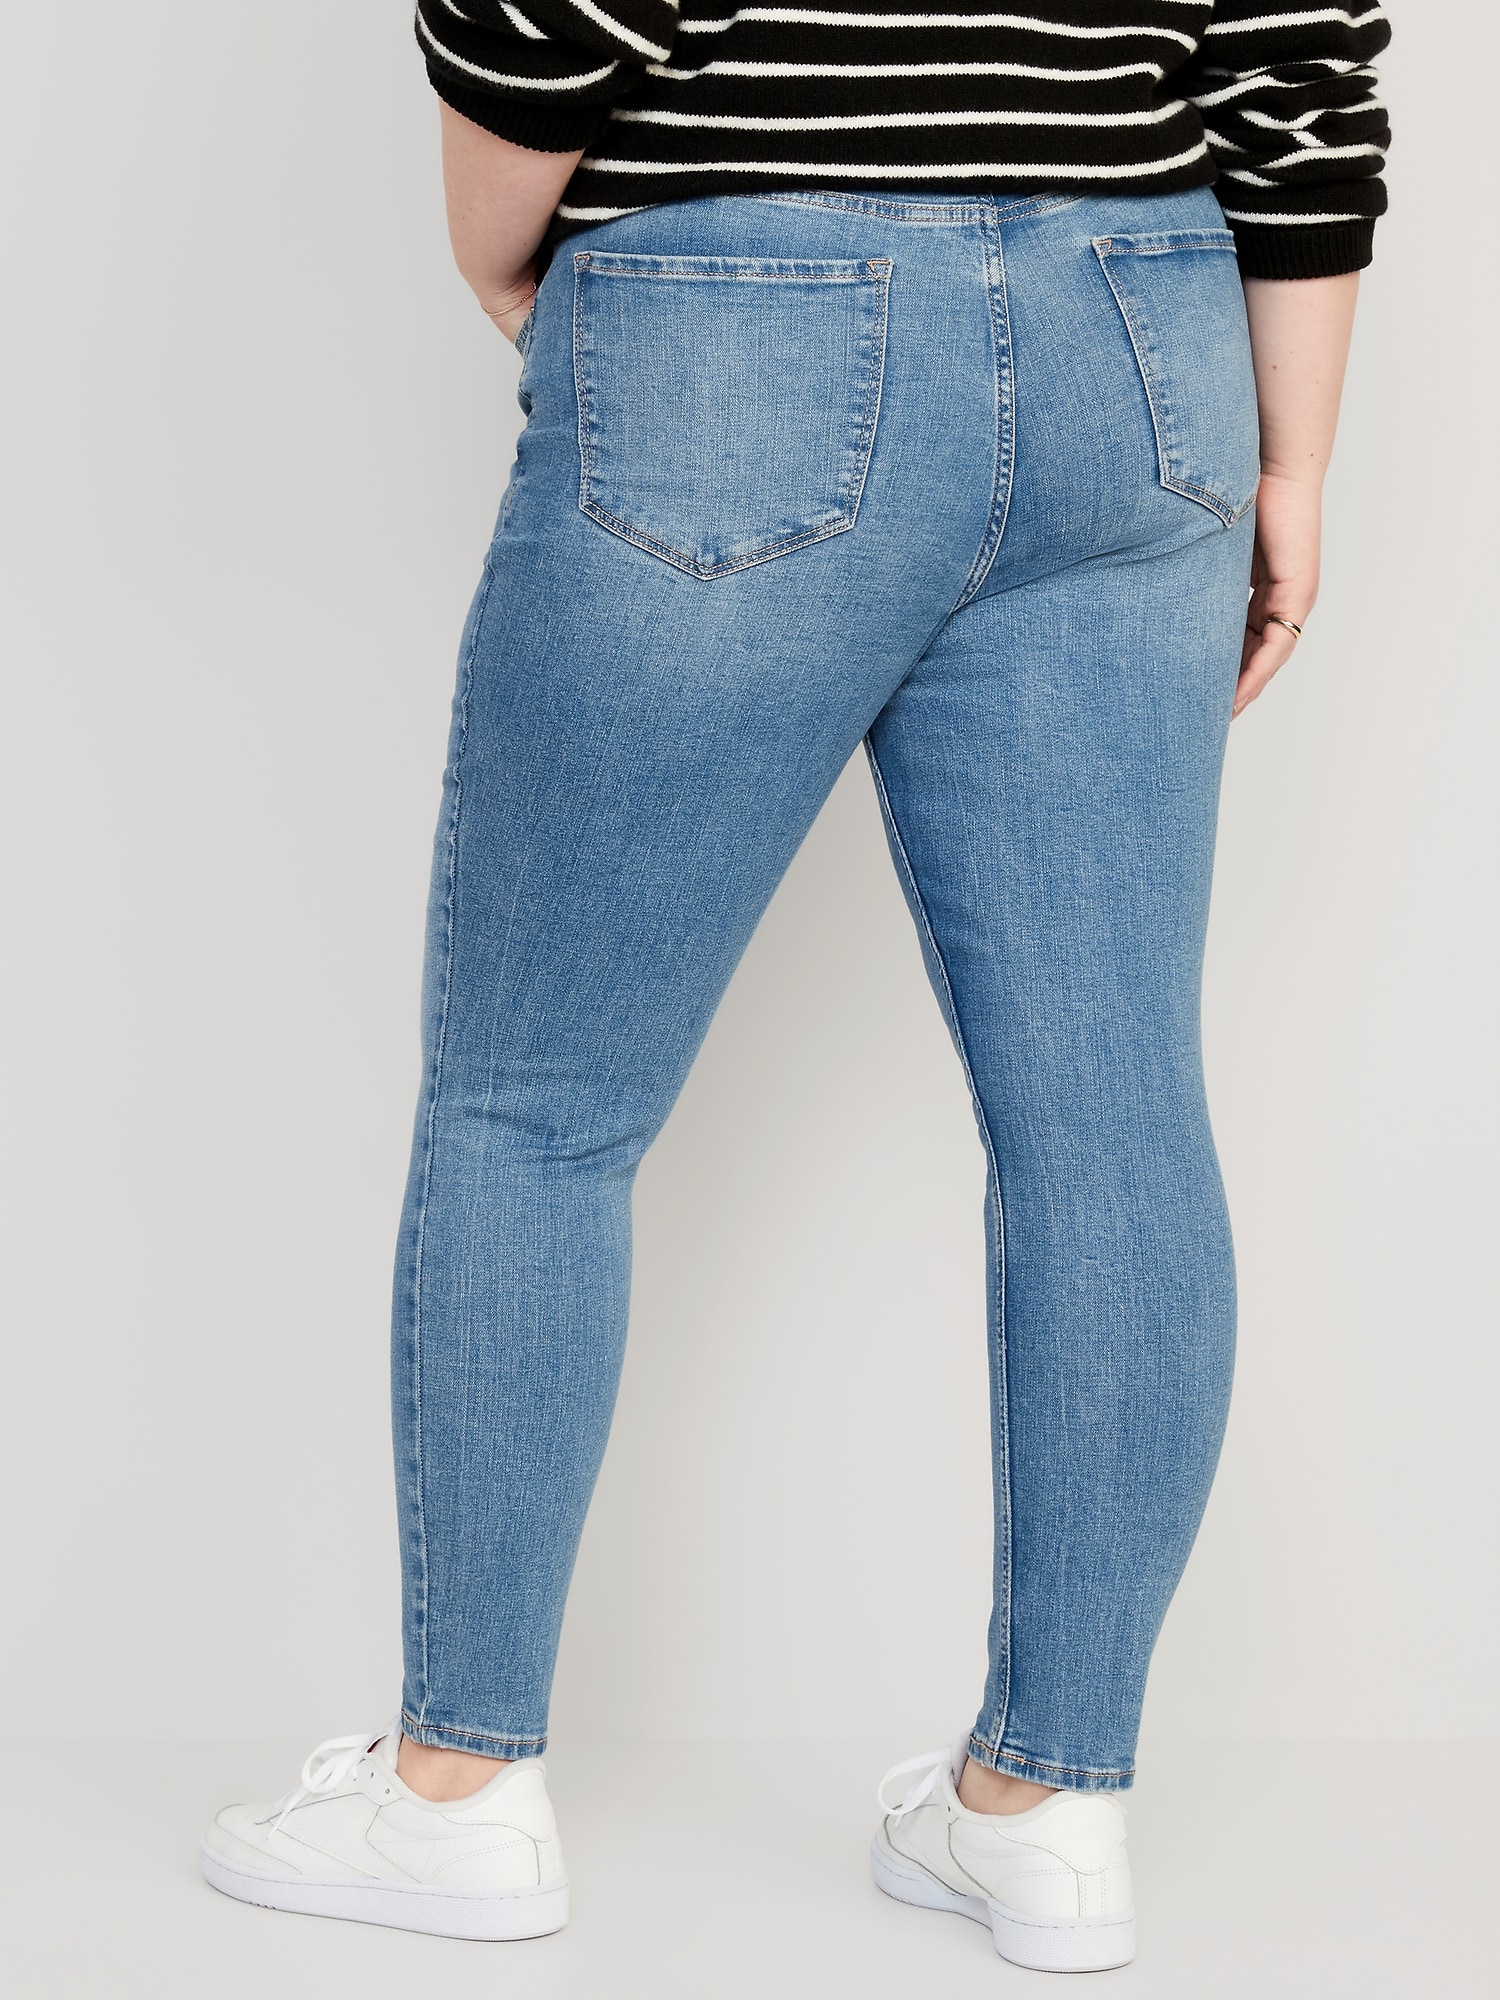 alcohol Productivo Queja High-Waisted Rockstar Super-Skinny Jeans for Women | Old Navy